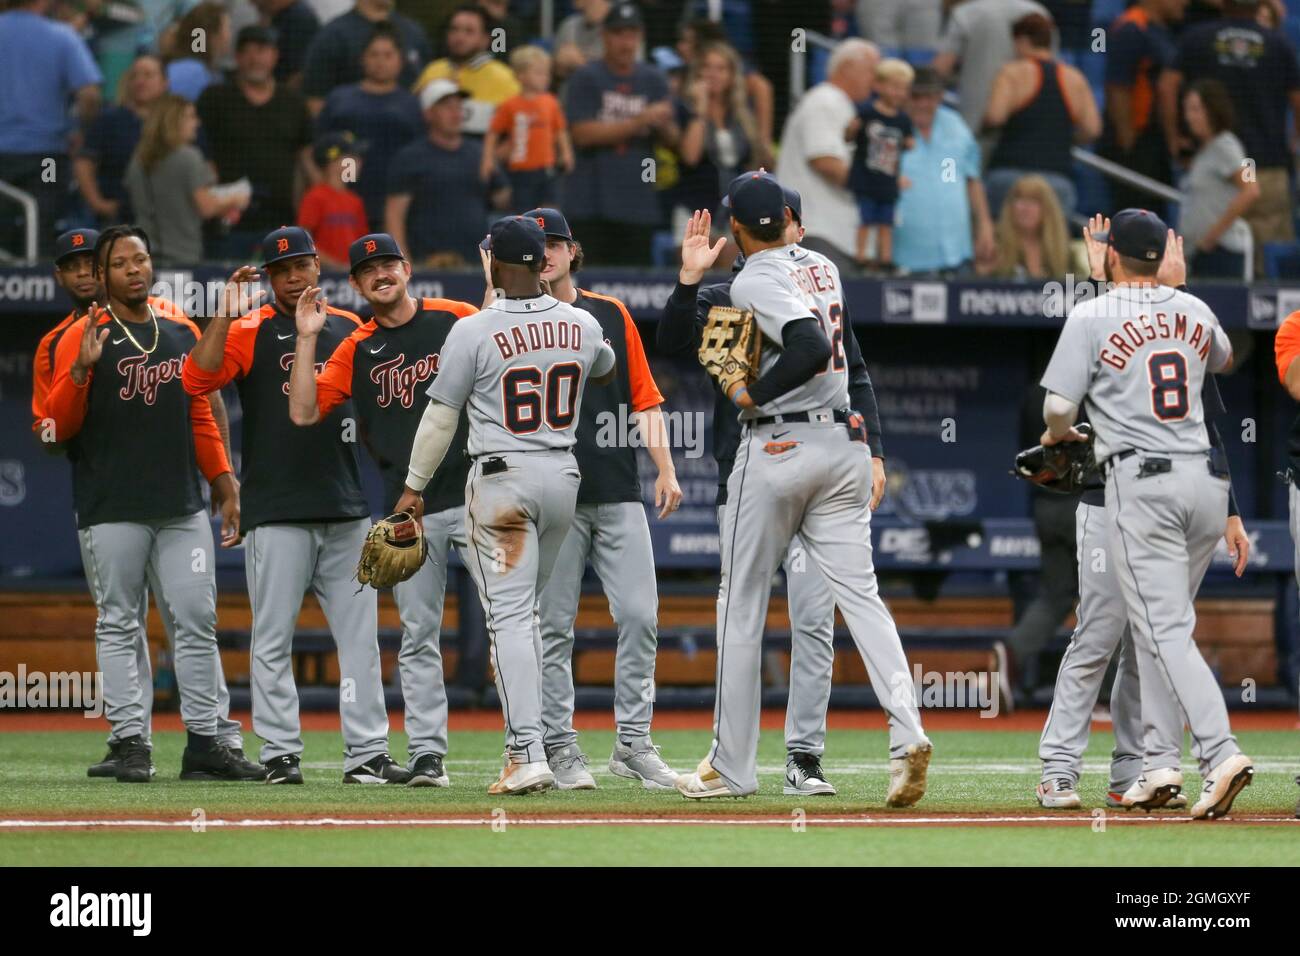 St. Petersburg, FL. USA;  The Detroit Tigers bullpen high fives their teammates coming off the field after a major league baseball game against the Ta Stock Photo